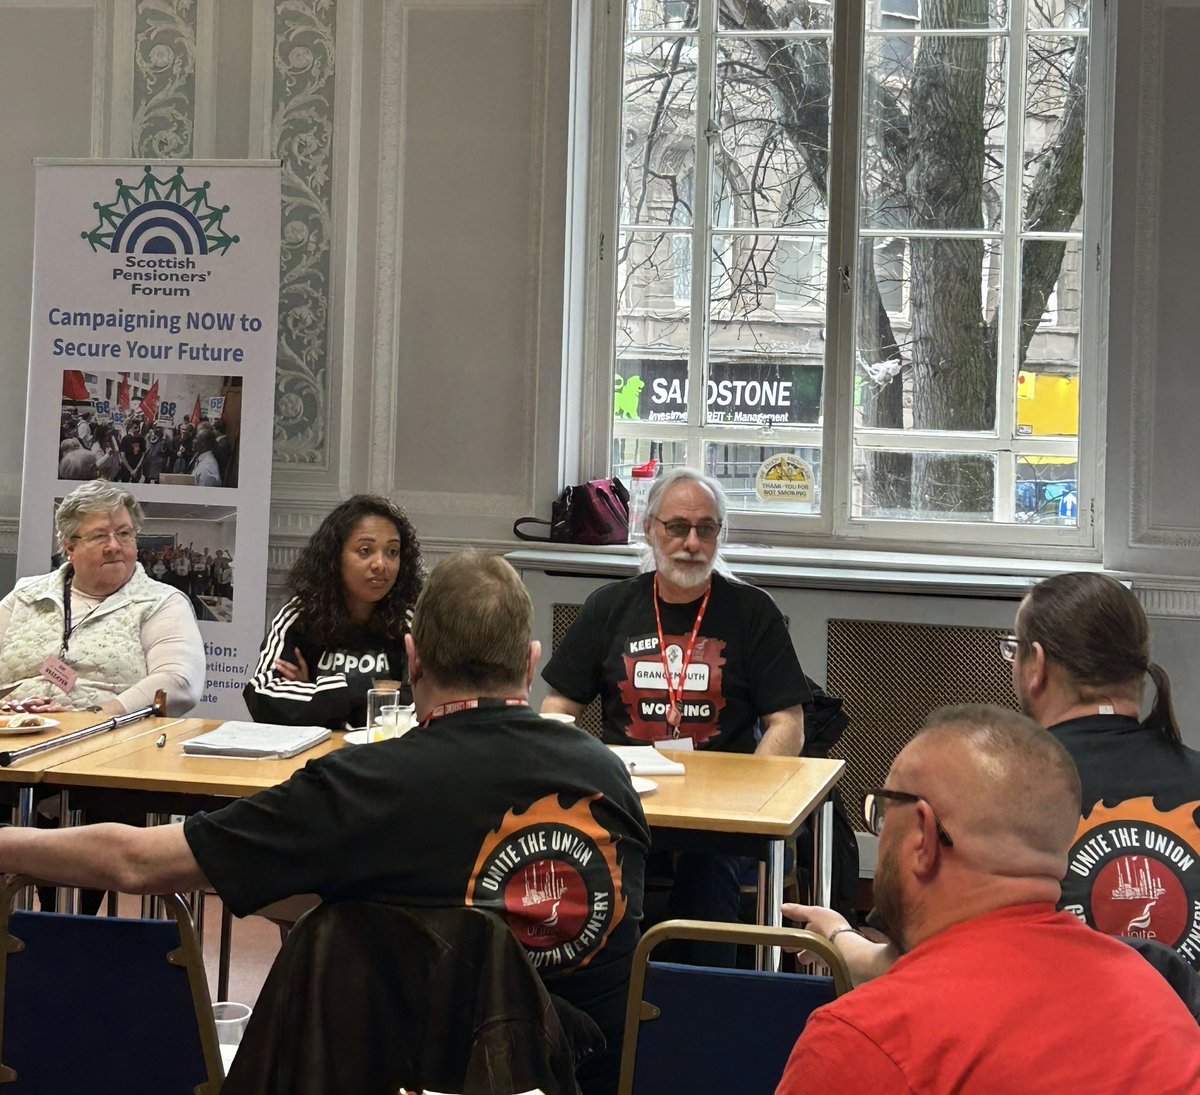 Thank you to everyone who attended our #STUC24 fringe meeting on pensions earlier today and to our speakers. Support for our work as always from @EISUnion @UniteScotland @unisonscot and to our #68istoolate campaign colleagues @ClaireUnite @ScotWalker68. Our campaign continues…